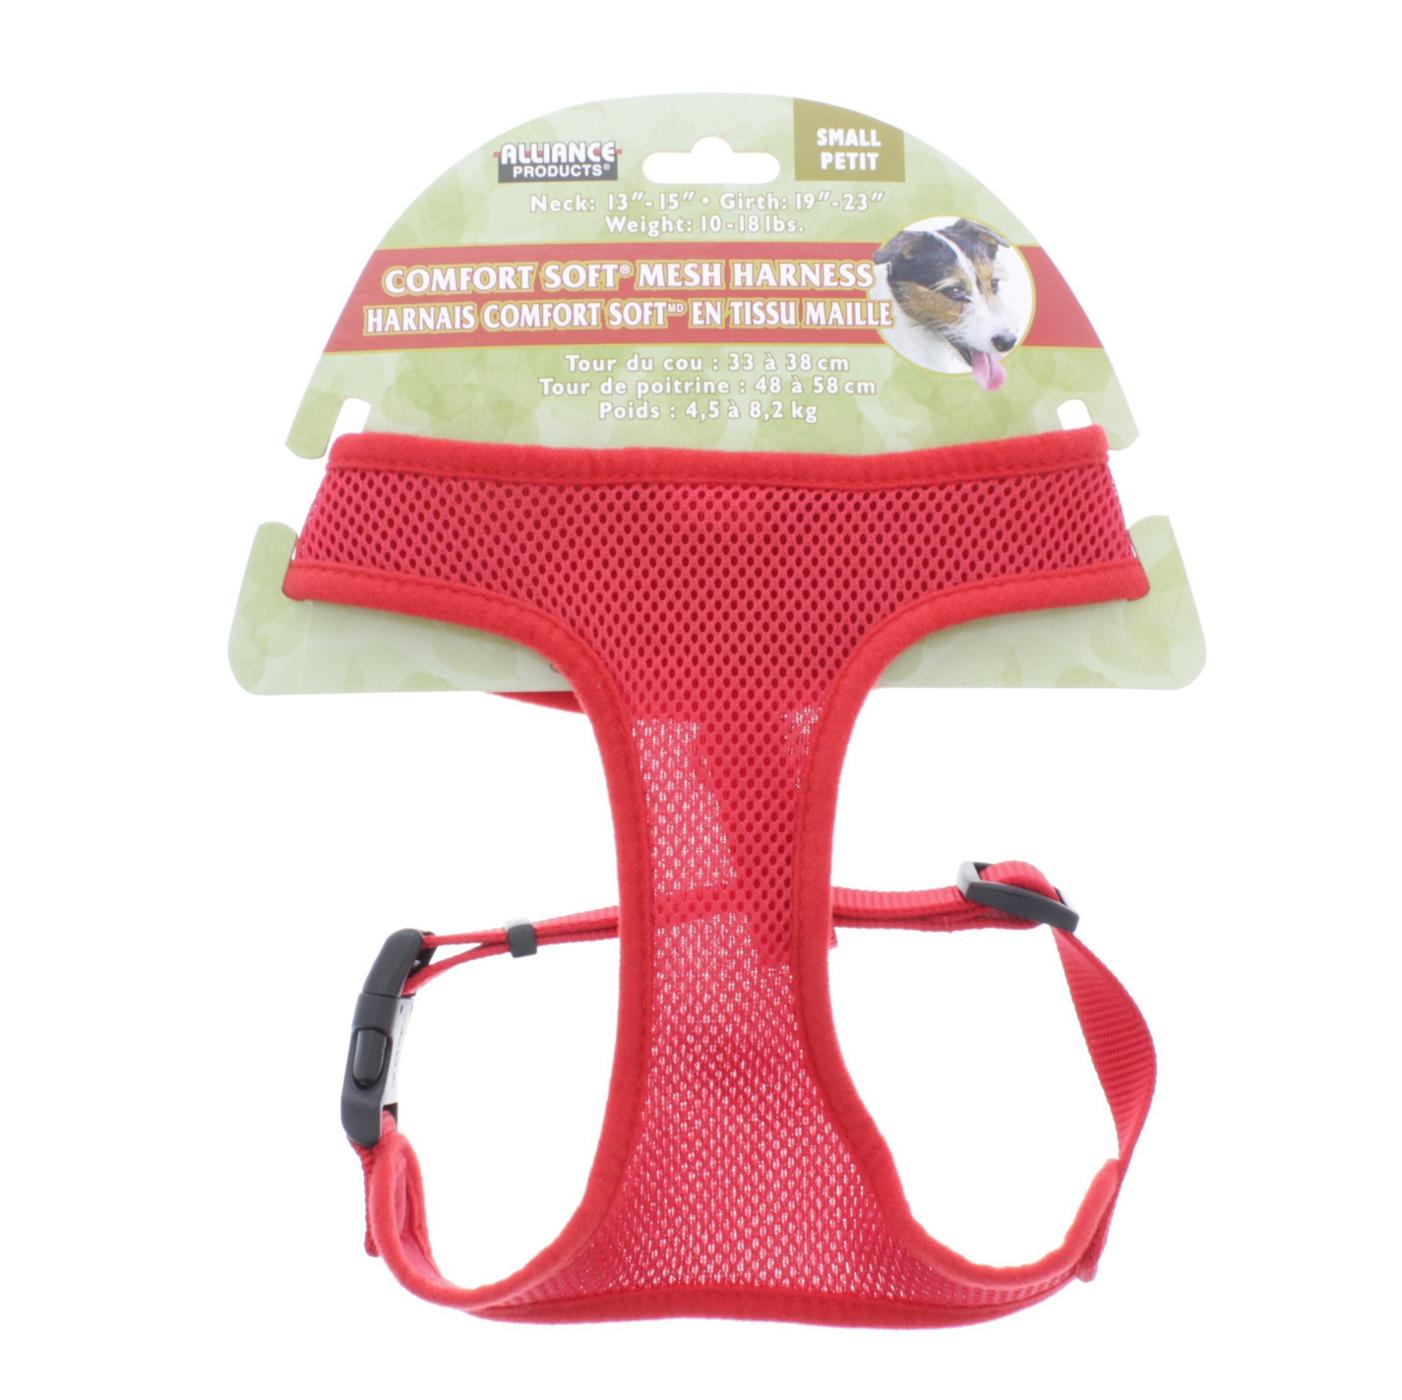 Coastal Pet Products Comfort Soft Small Adjustable Harness, Assorted Colors; image 2 of 3